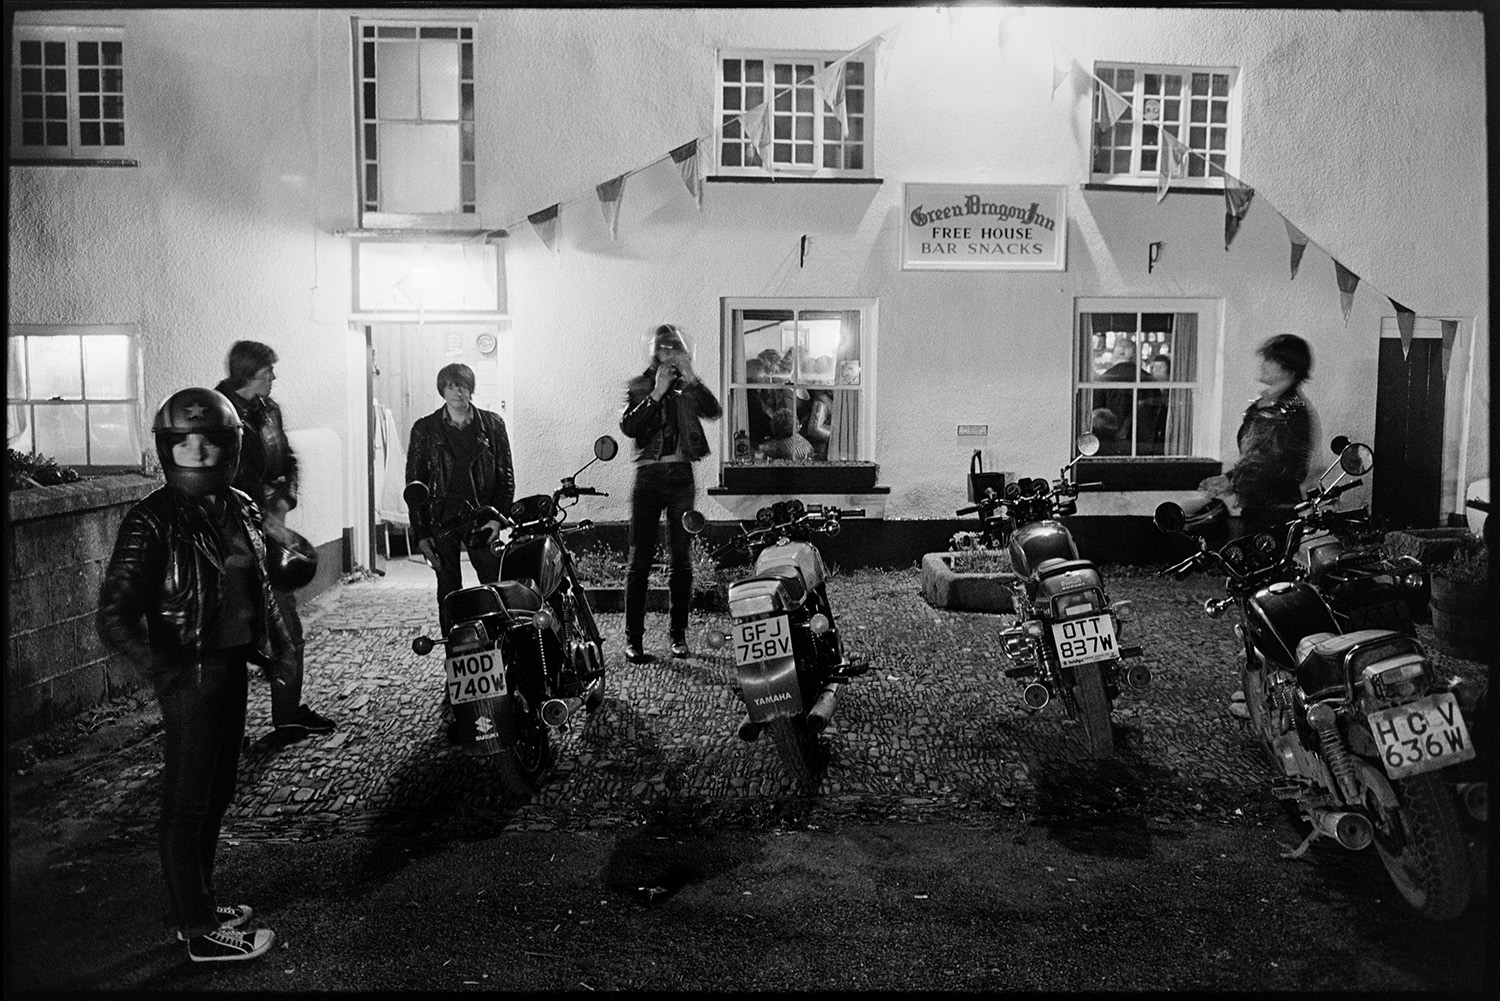 Motorbikes parked outside pub at night, carnival night. 
[Young men stood by their motorbikes outside the Green Dragon Inn in Northlew on the night of the village carnival. The pub is decorated with bunting.]